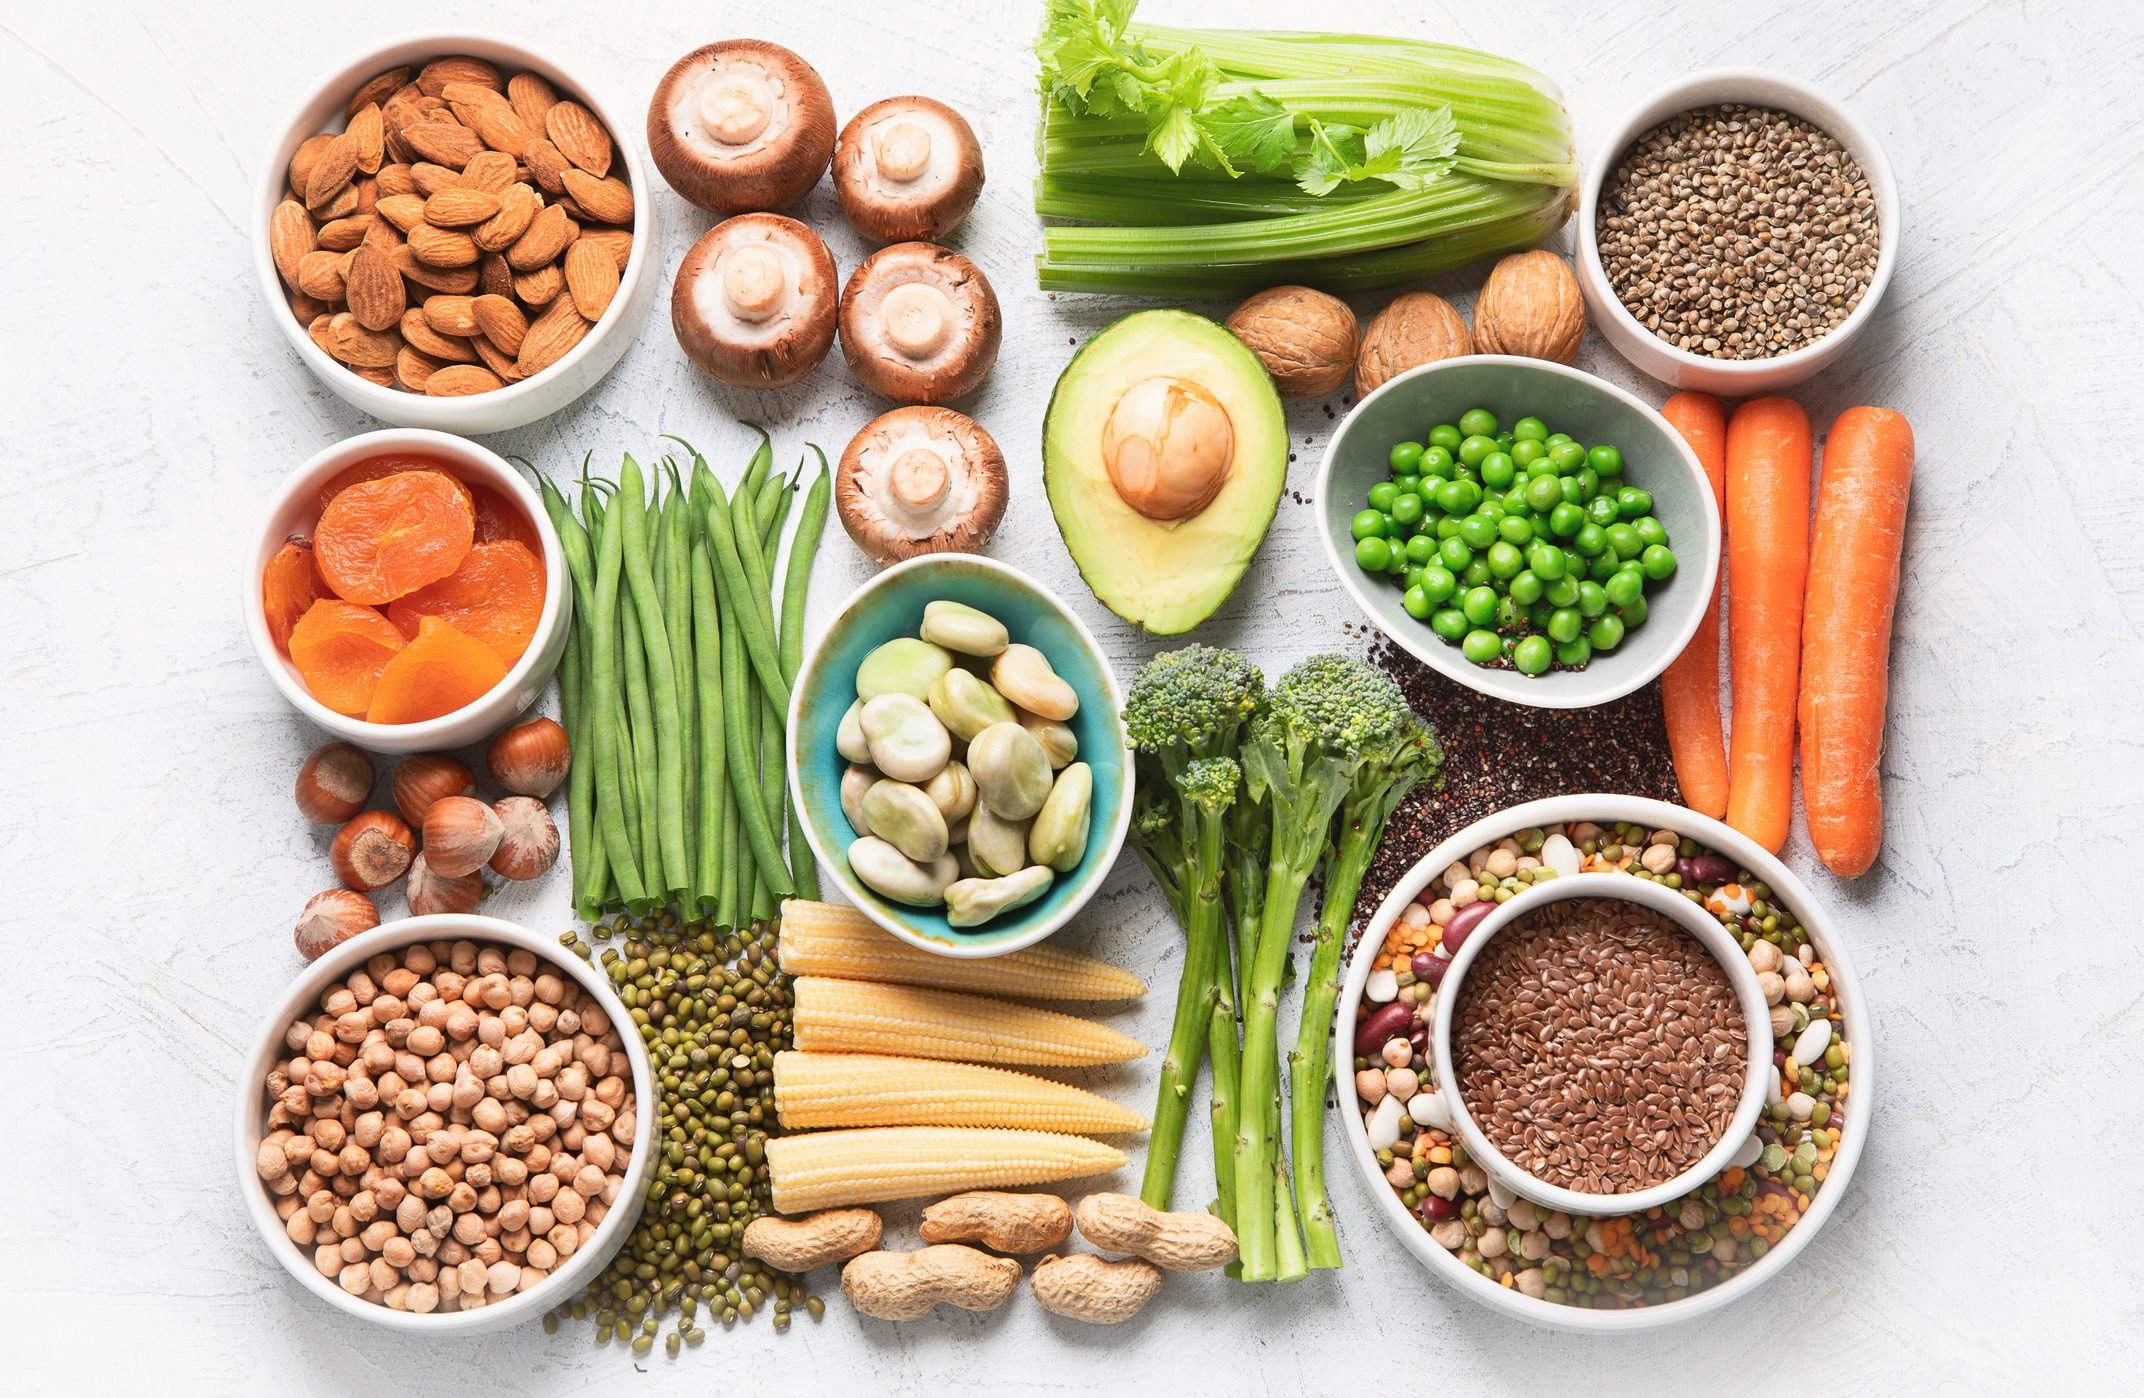 Plant-Based Protein and Fat Substitutes for Common Ingredients